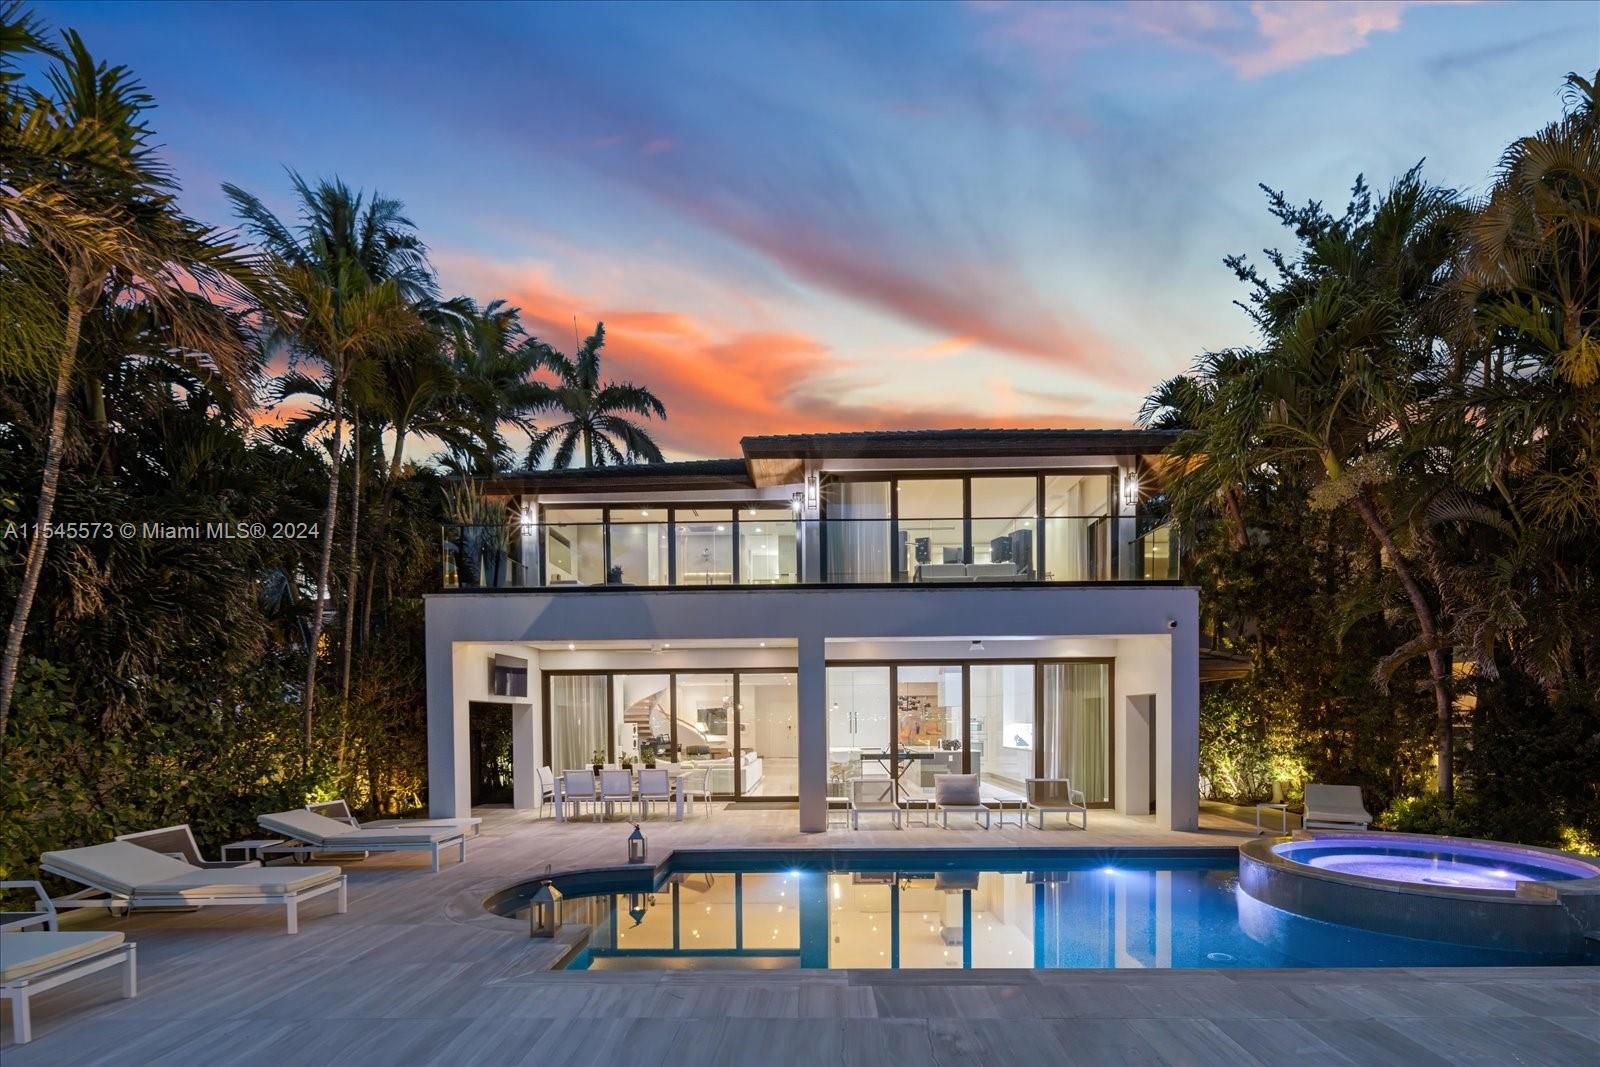 Lush tropical landscaping envelops this exquisite contemporary waterfront residence with mesmerizing vistas of Miami Beach from its expansive floor-to-ceiling telescopic sliding glass doors. Featuring 7 bedrooms, 7.5 bathrooms, an elegant Italian kitchen, Miele/SubZero appliances, luxurious Dornbracht bath fixtures, and a cutting-edge Lutron lighting/Savant automated Smart system. Immerse yourself in tranquility and seclusion as you step into the home's picturesque courtyard entrance and then walk thru the open plan home to the spacious outdoor with wide bay water views. Experience the ultimate Miami lifestyle as you are walking distance to Sunset Harbor, and minutes from Design District and downtown with prestigious shopping, fine dining and nightlife.